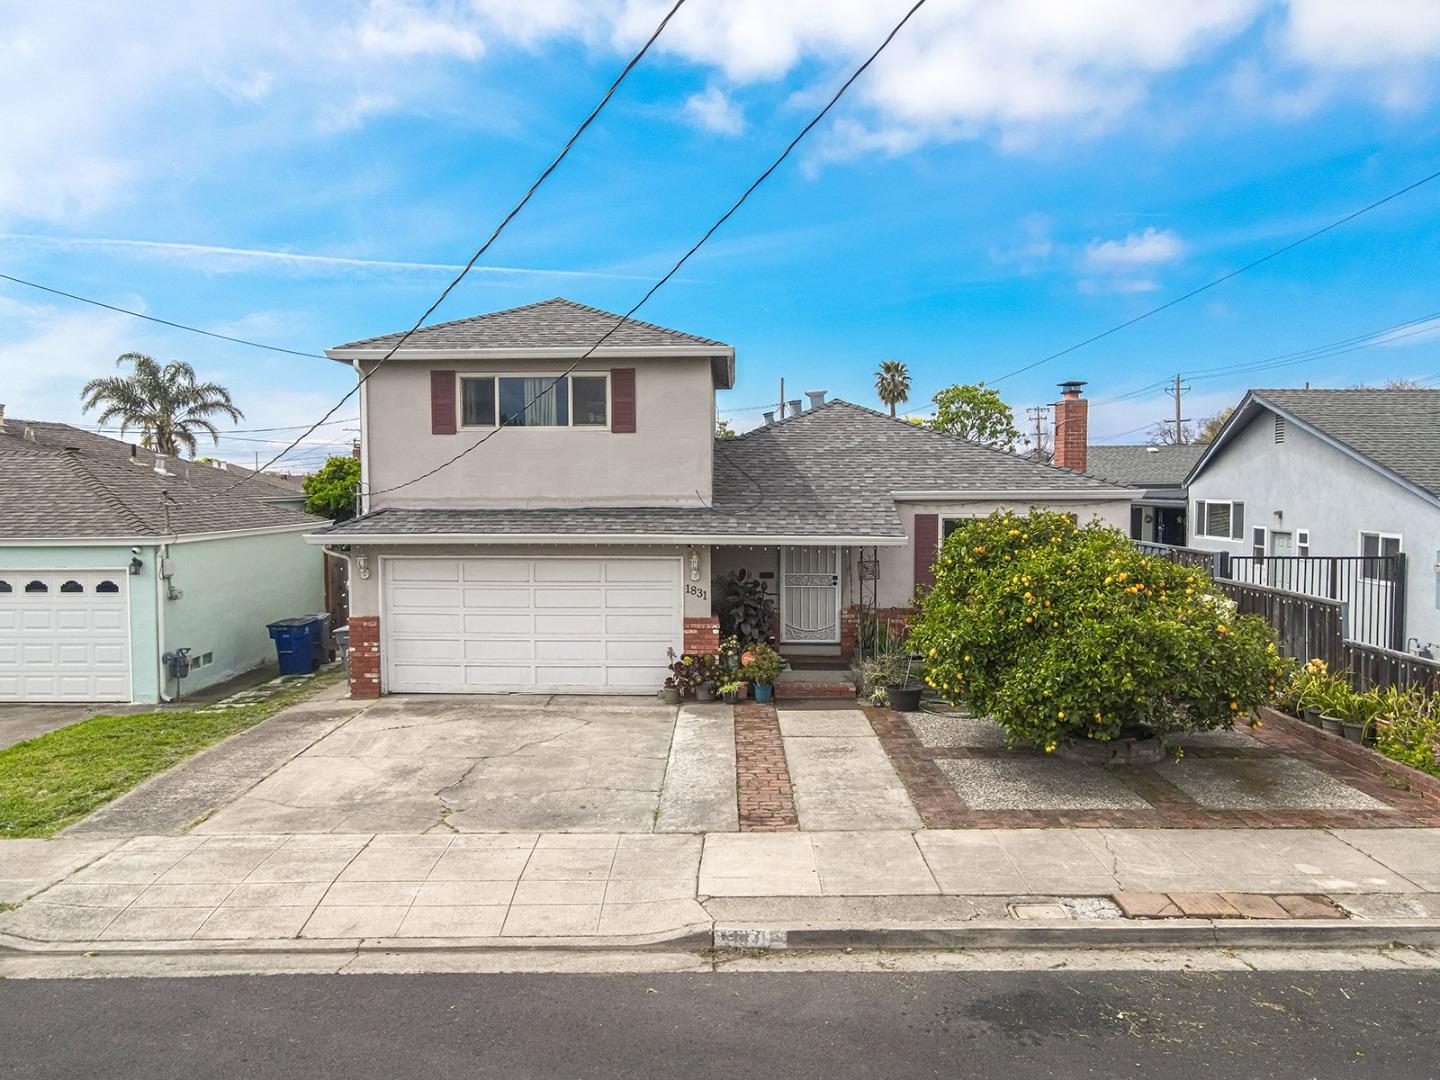 Photo of 1831 Hilding Ave in San Leandro, CA